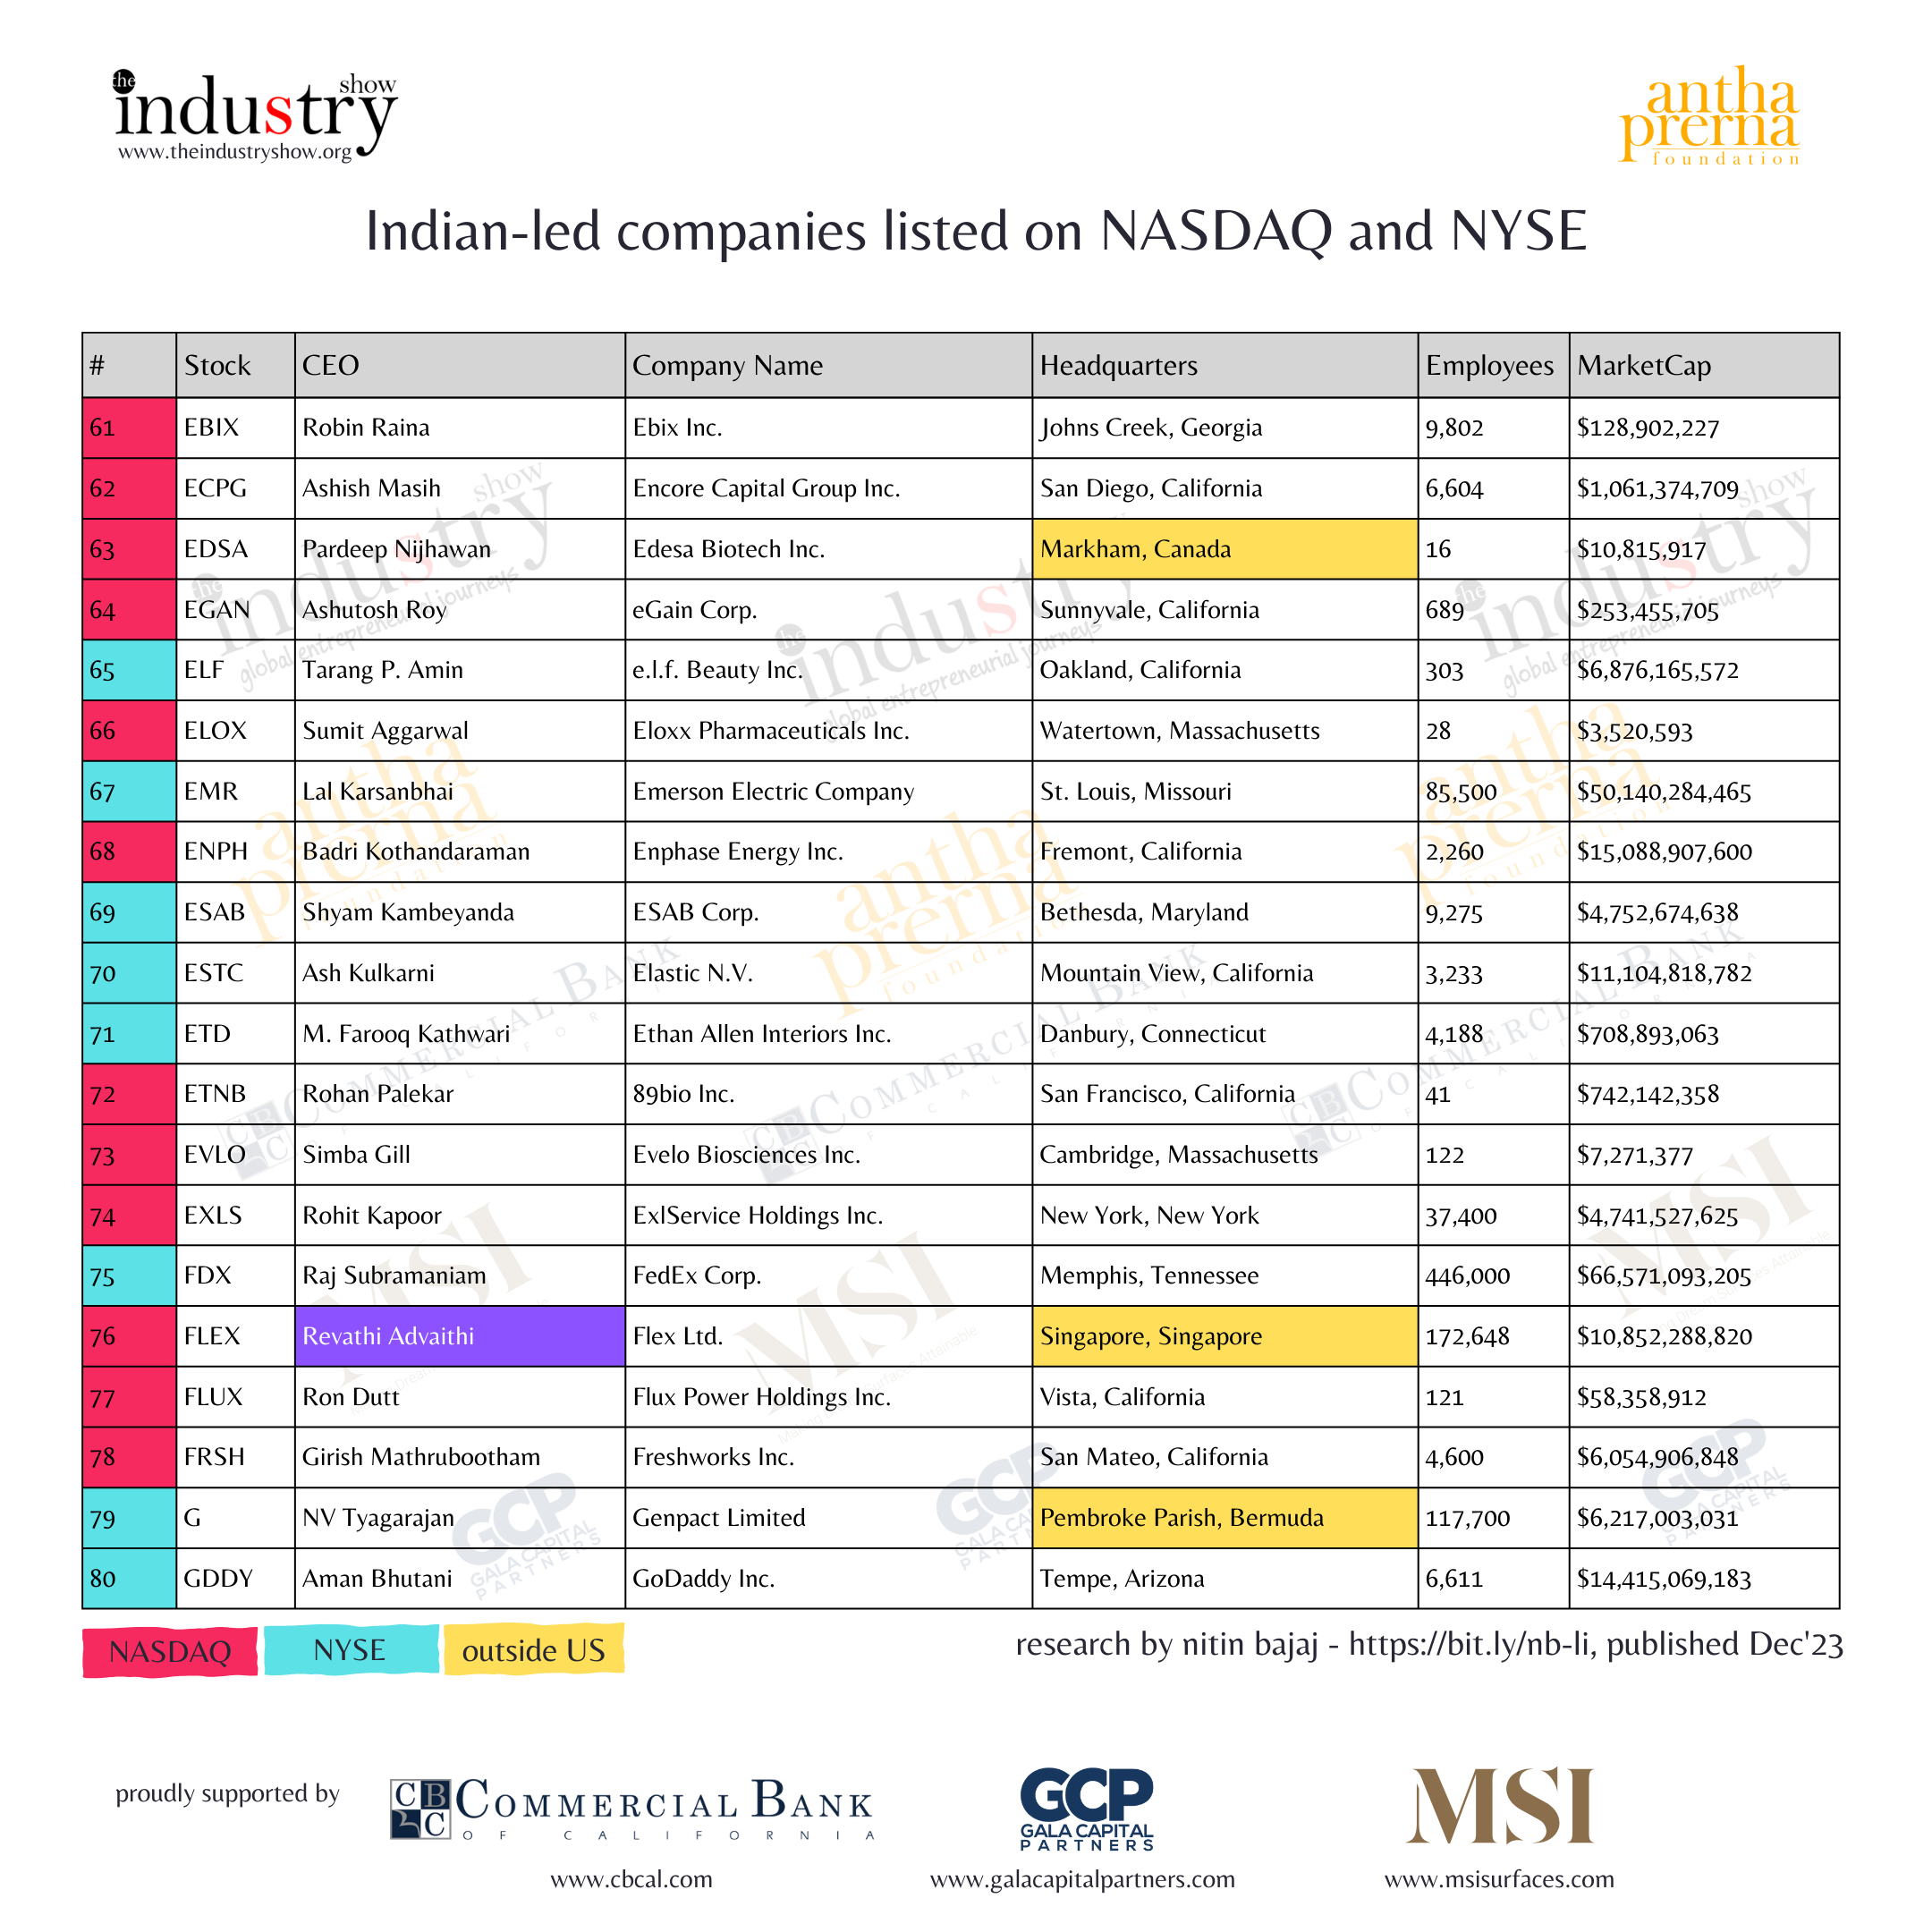 Indian-led companies listed on NASDAQ and NYSE